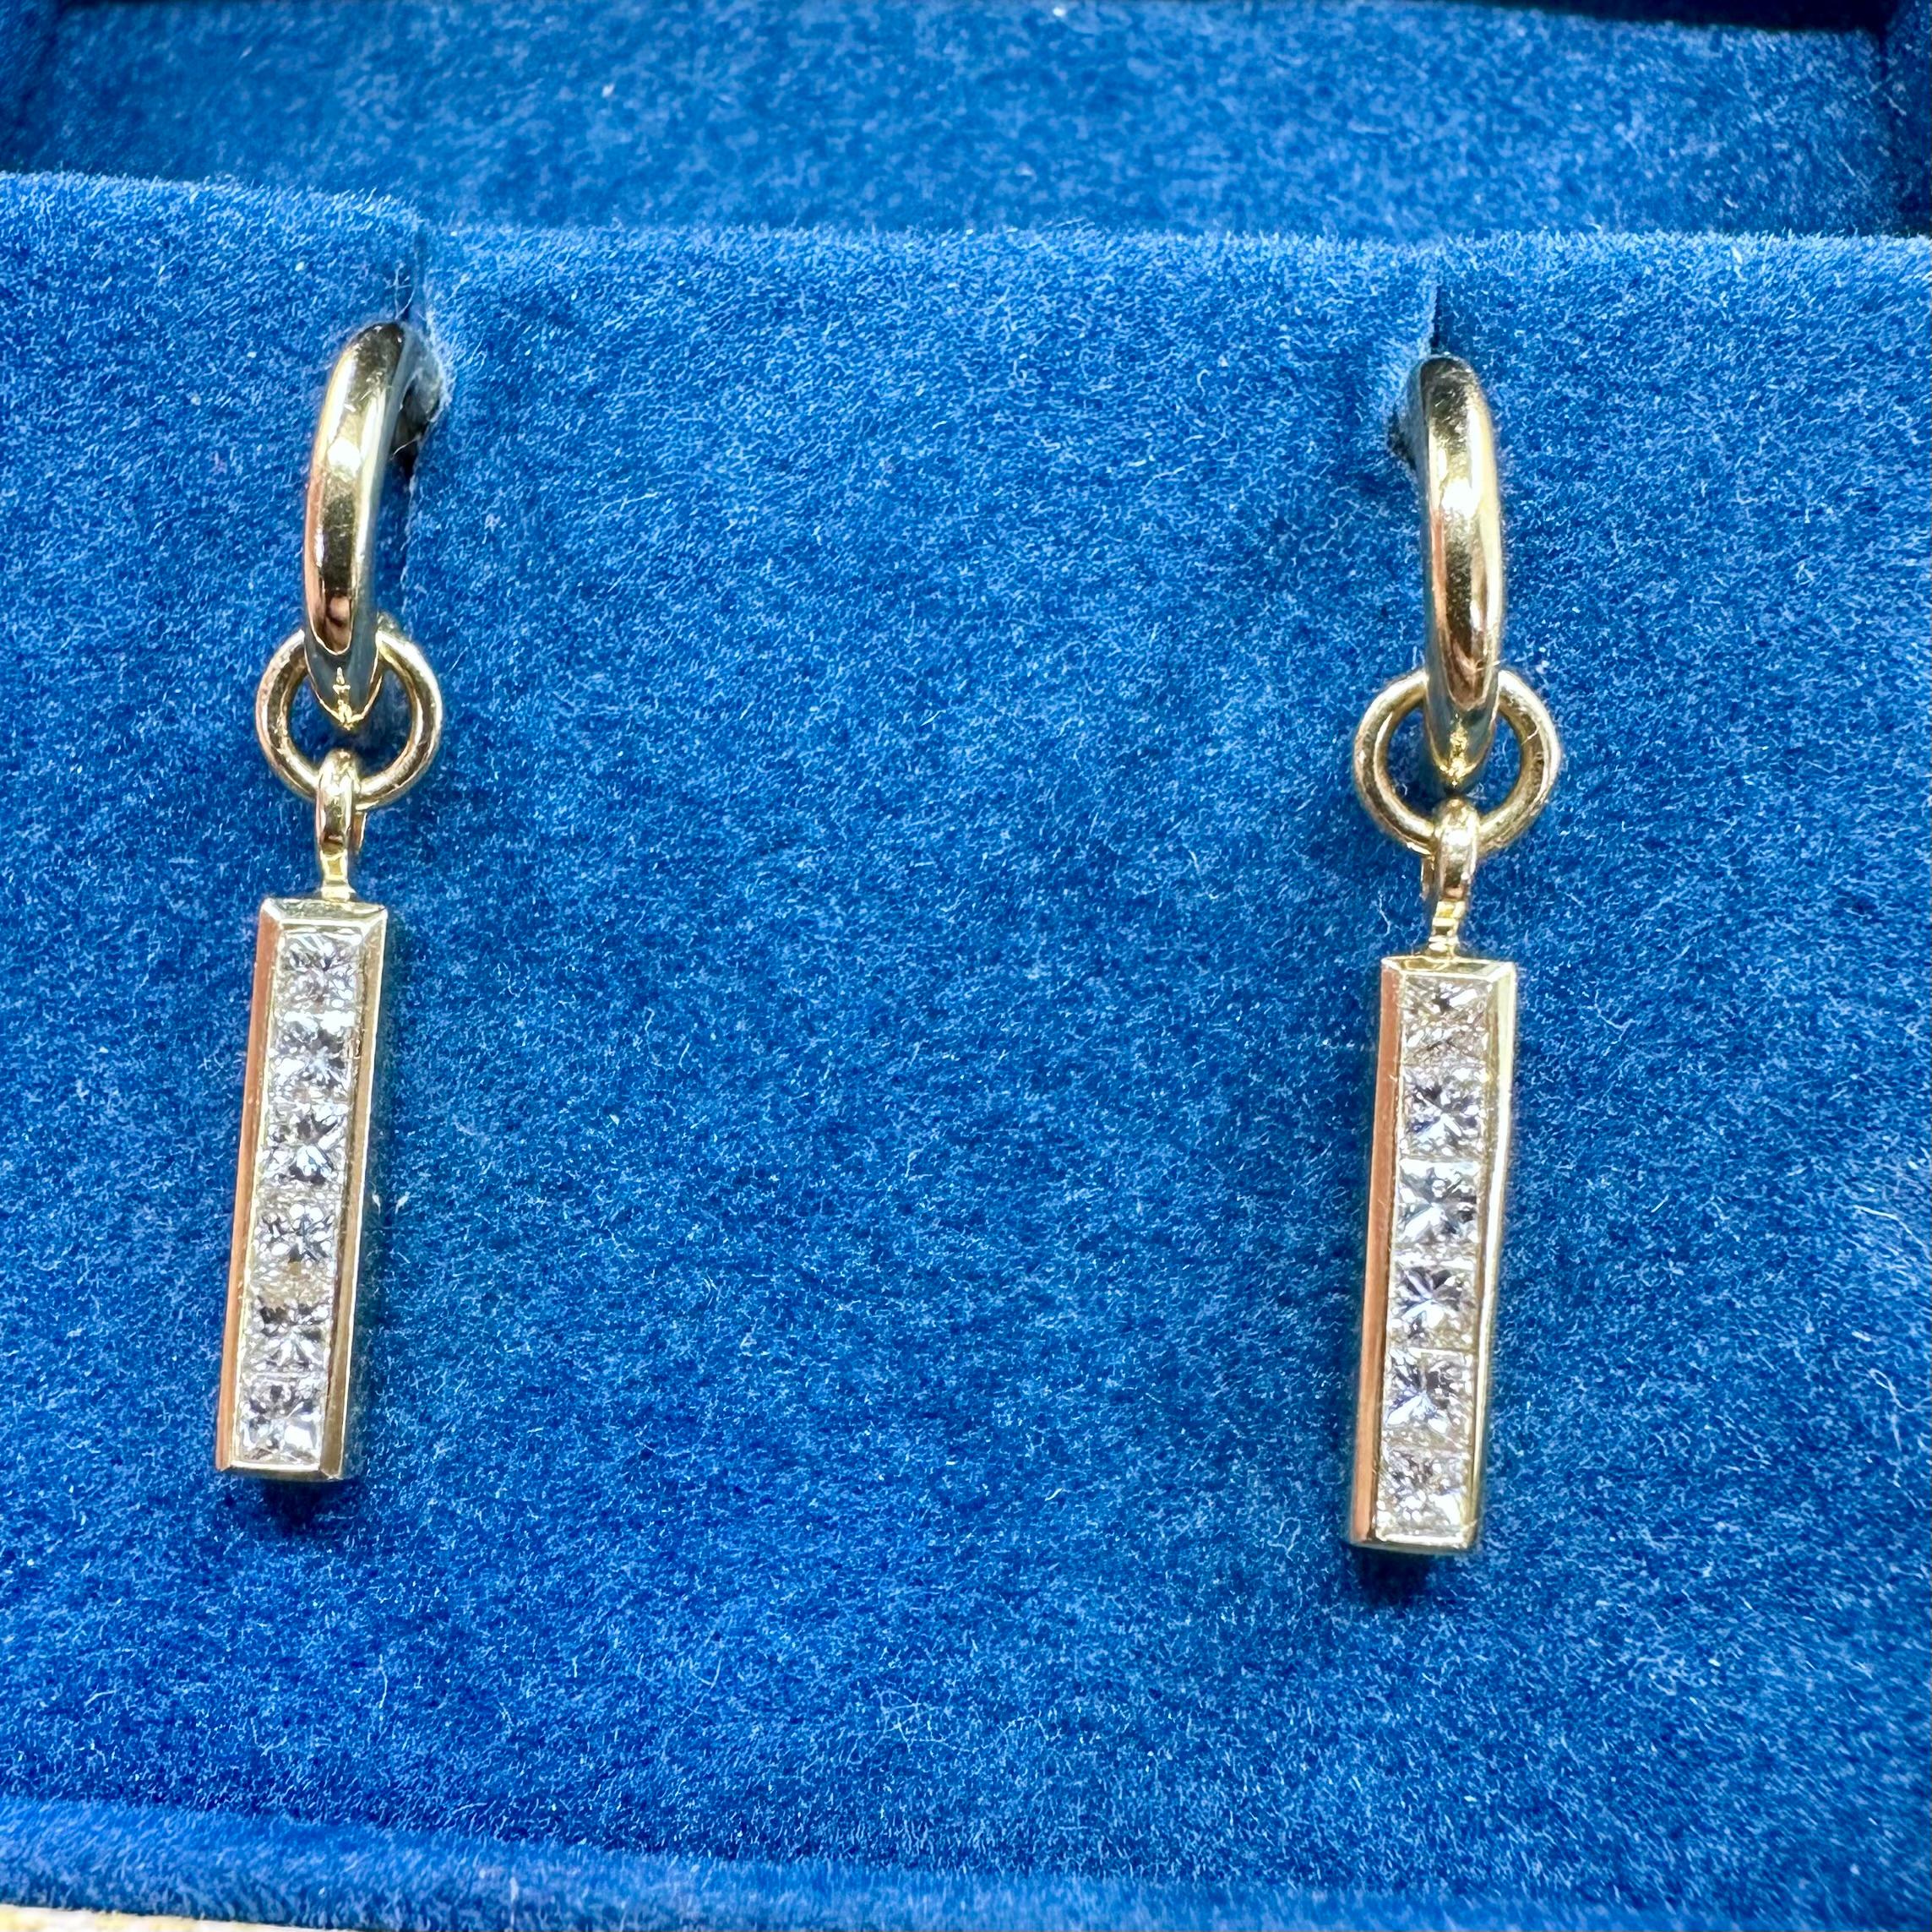 Theo Fennell 
Diamond Dangle Earrings Featuring 12 Princess Cut Diamonds and 18 k Yellow Gold Strip Collections  Est 1.00 cts of Diamonds
With original box. 
Dimension: 1.00 inch drop earrings
Hallmark: TF for Theo Fennell
also available is the